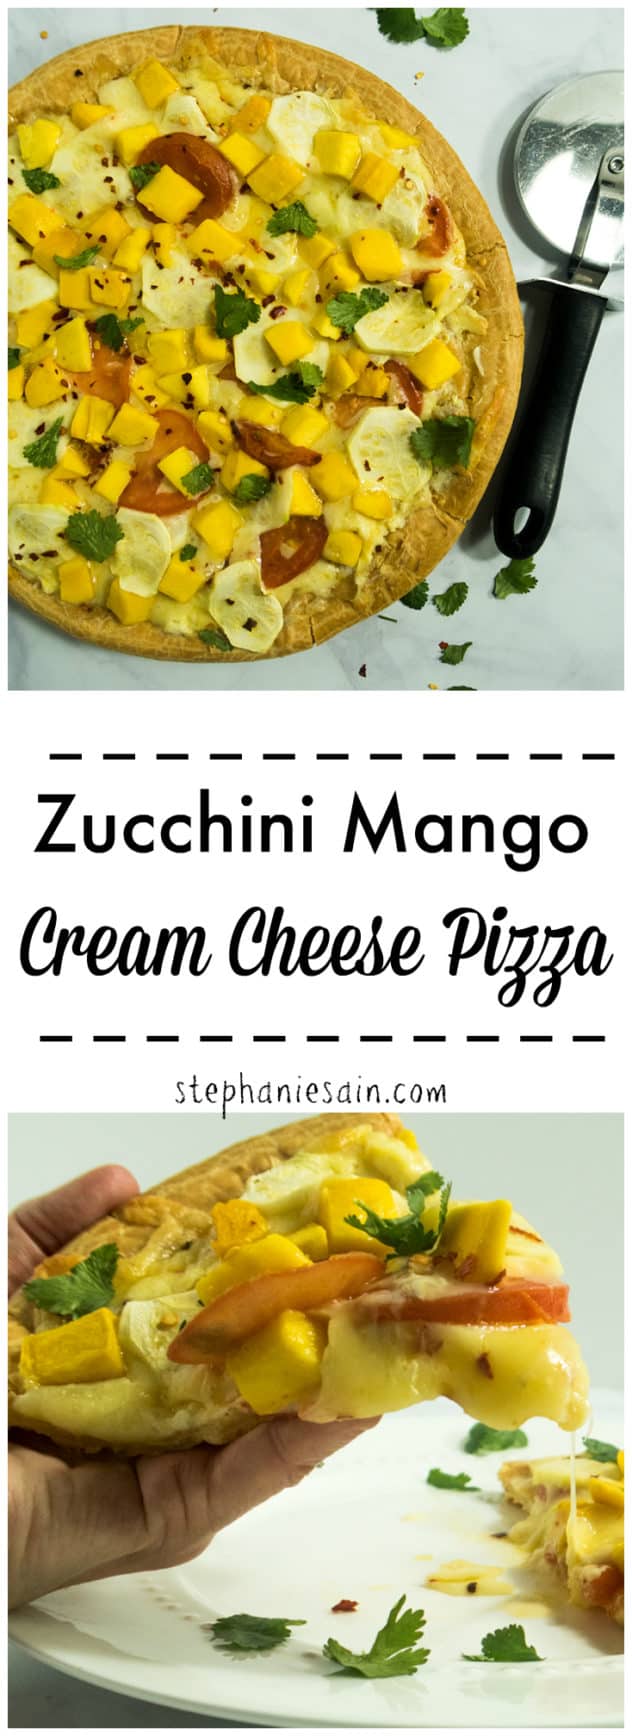 Zucchini Mango Cream Cheese Pizza is topped with cream cheese and loaded with zucchini and mango for a tasty fun way to switch up Pizza night! Vegetarian & Gluten Free.